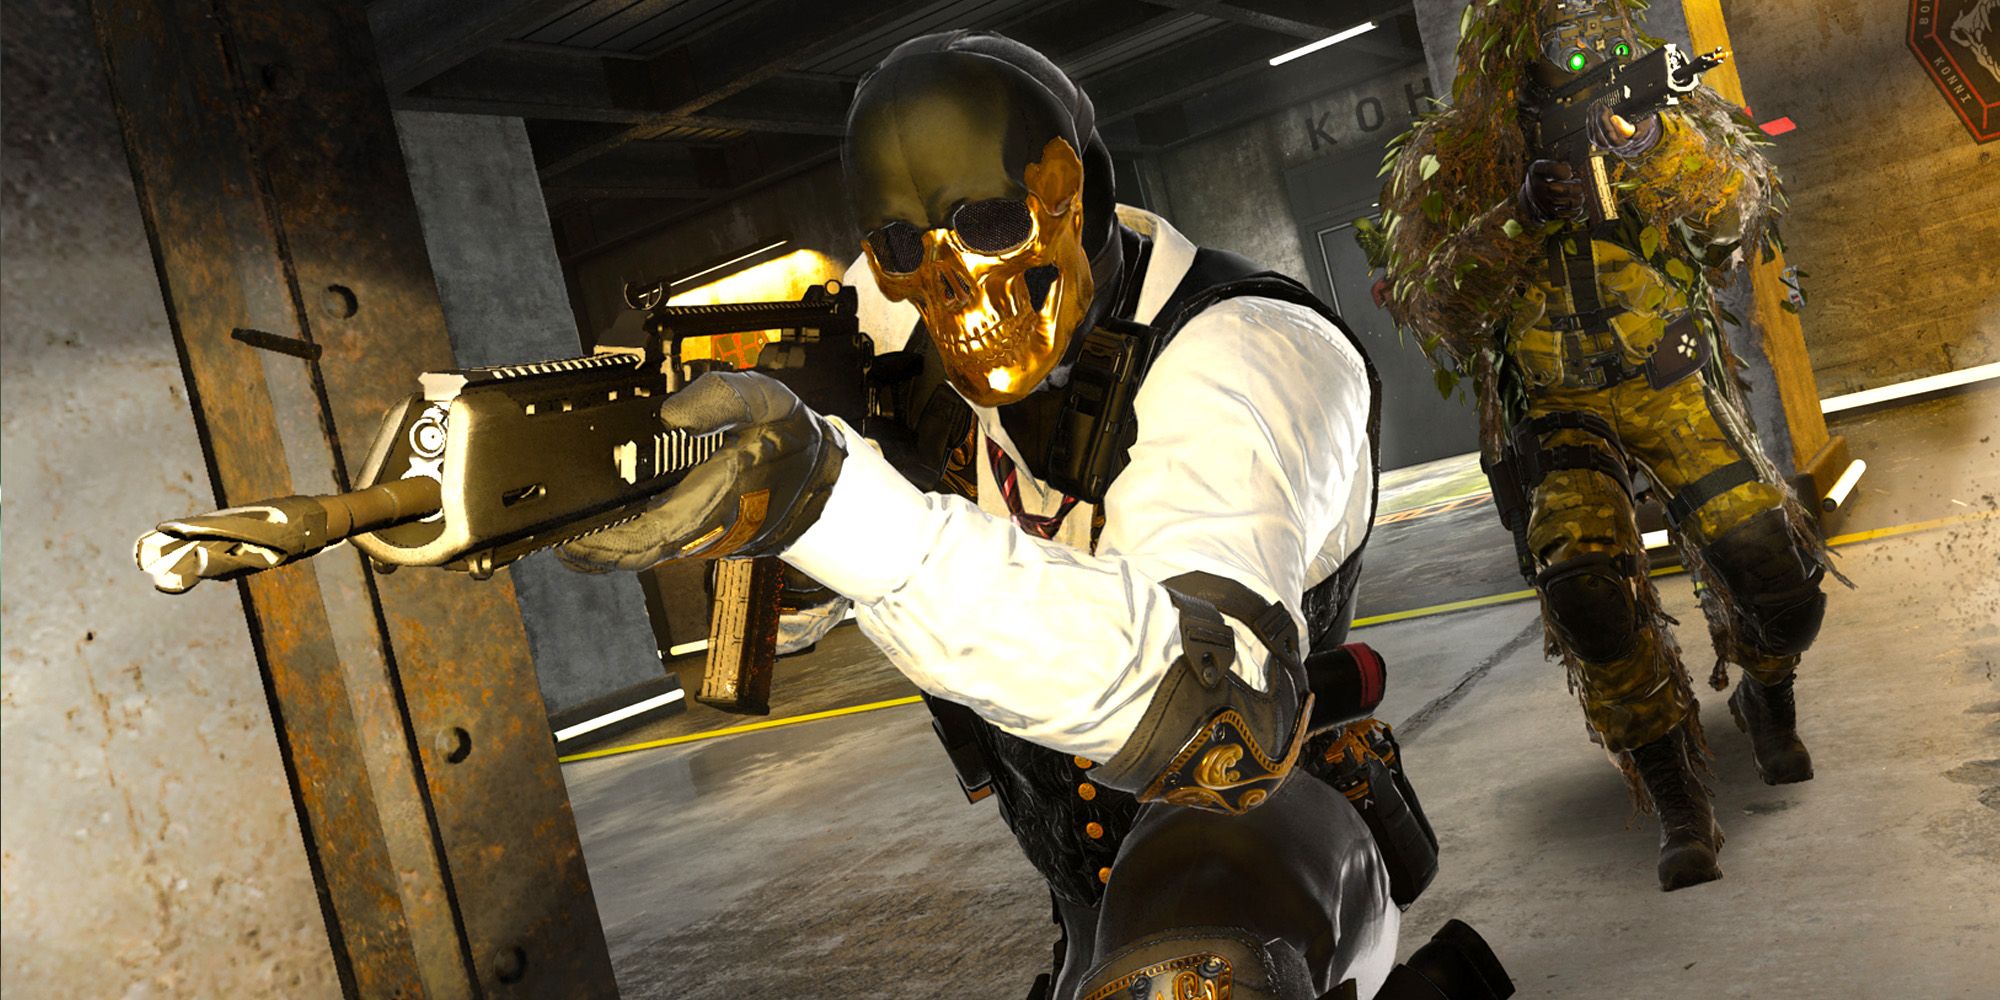 A Call of Duty player in a gold and black skull mask crouching while aiming.